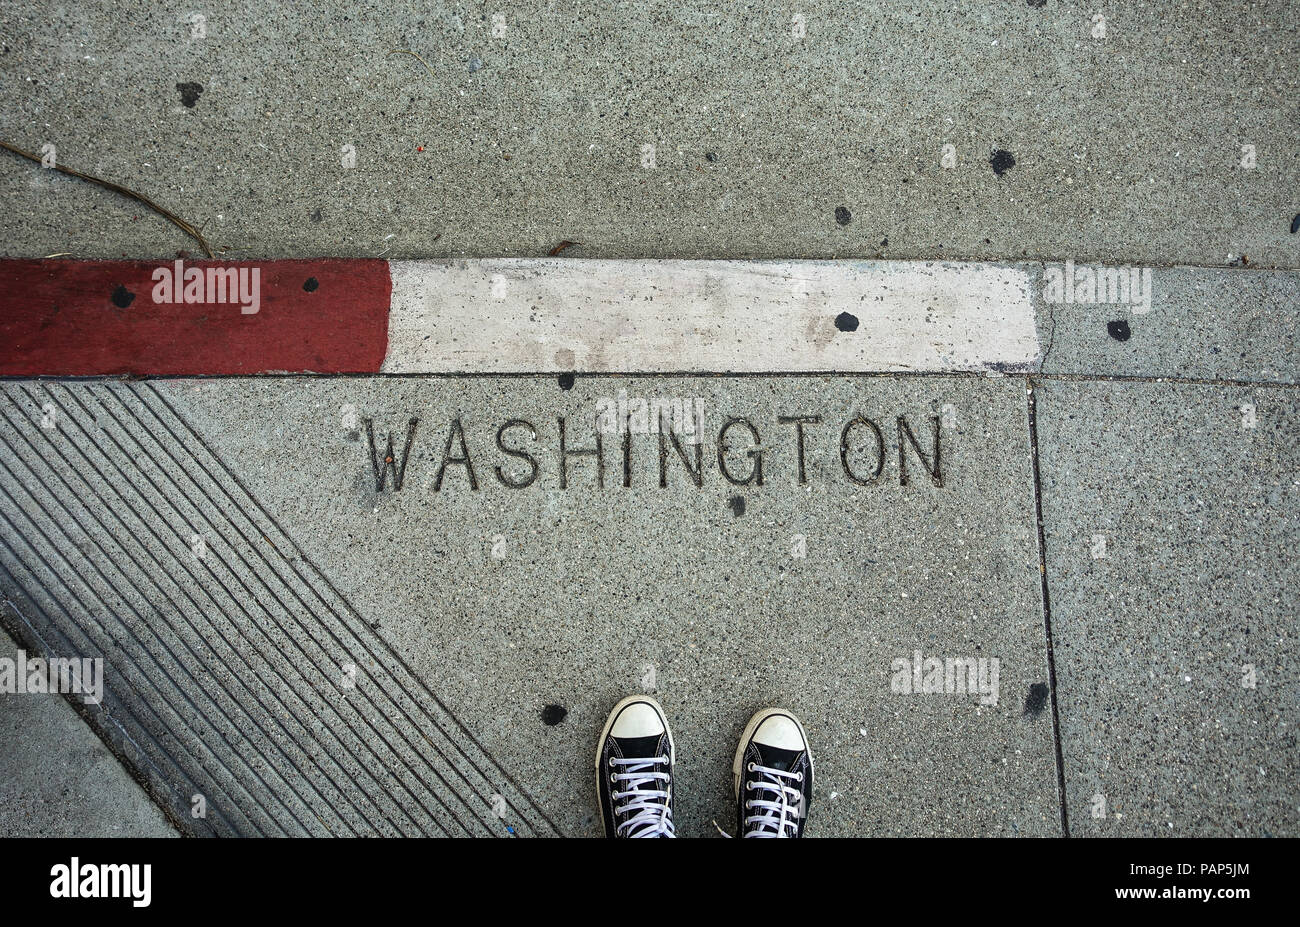 A pedestrian's feet and tennis shoes, looking down on Washington Street in downtown San Francisco, California - USA Stock Photo